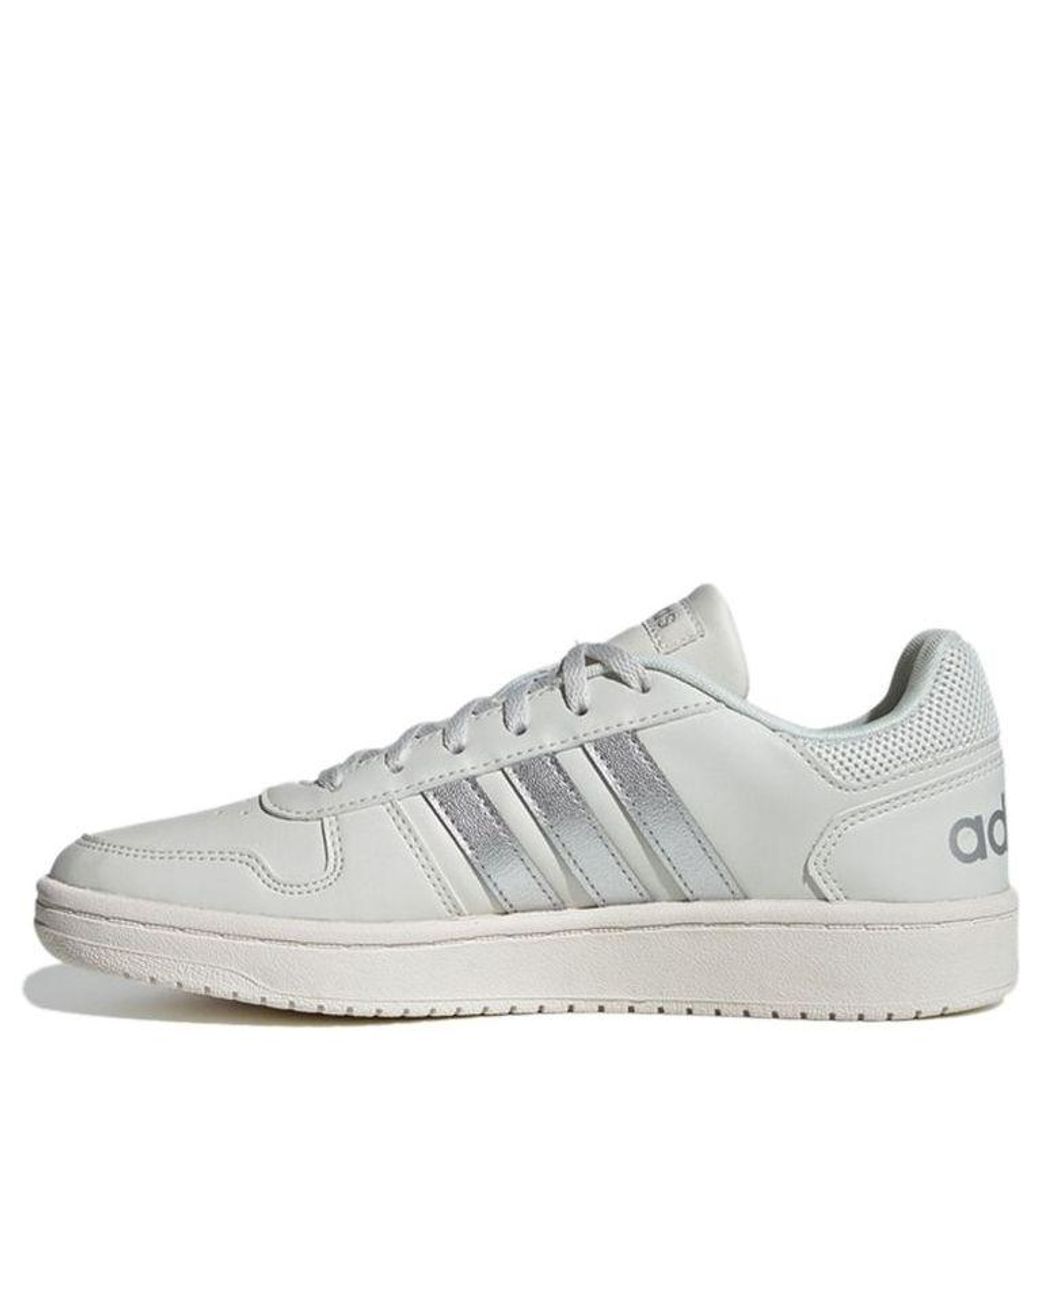 Adidas Neo Hoops 2.0 Grey in White | Lyst